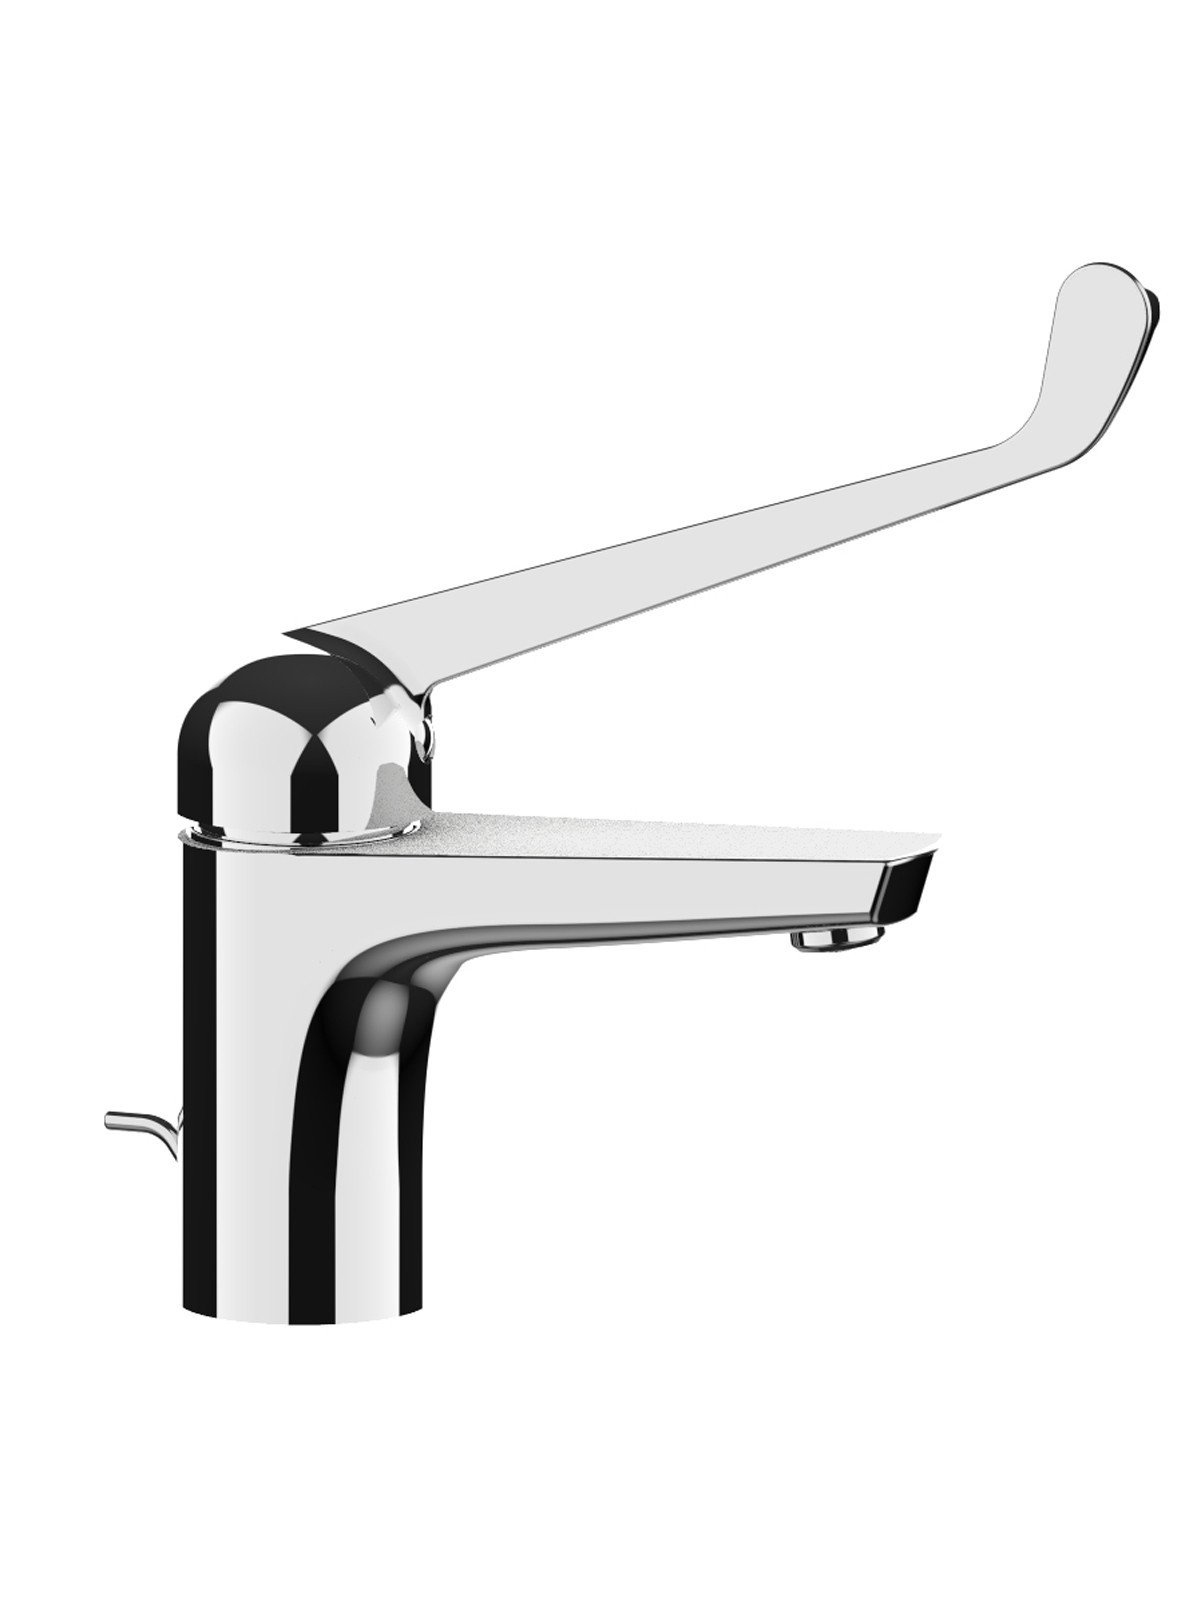 Long-lever washbasin mixer with pop-up waste